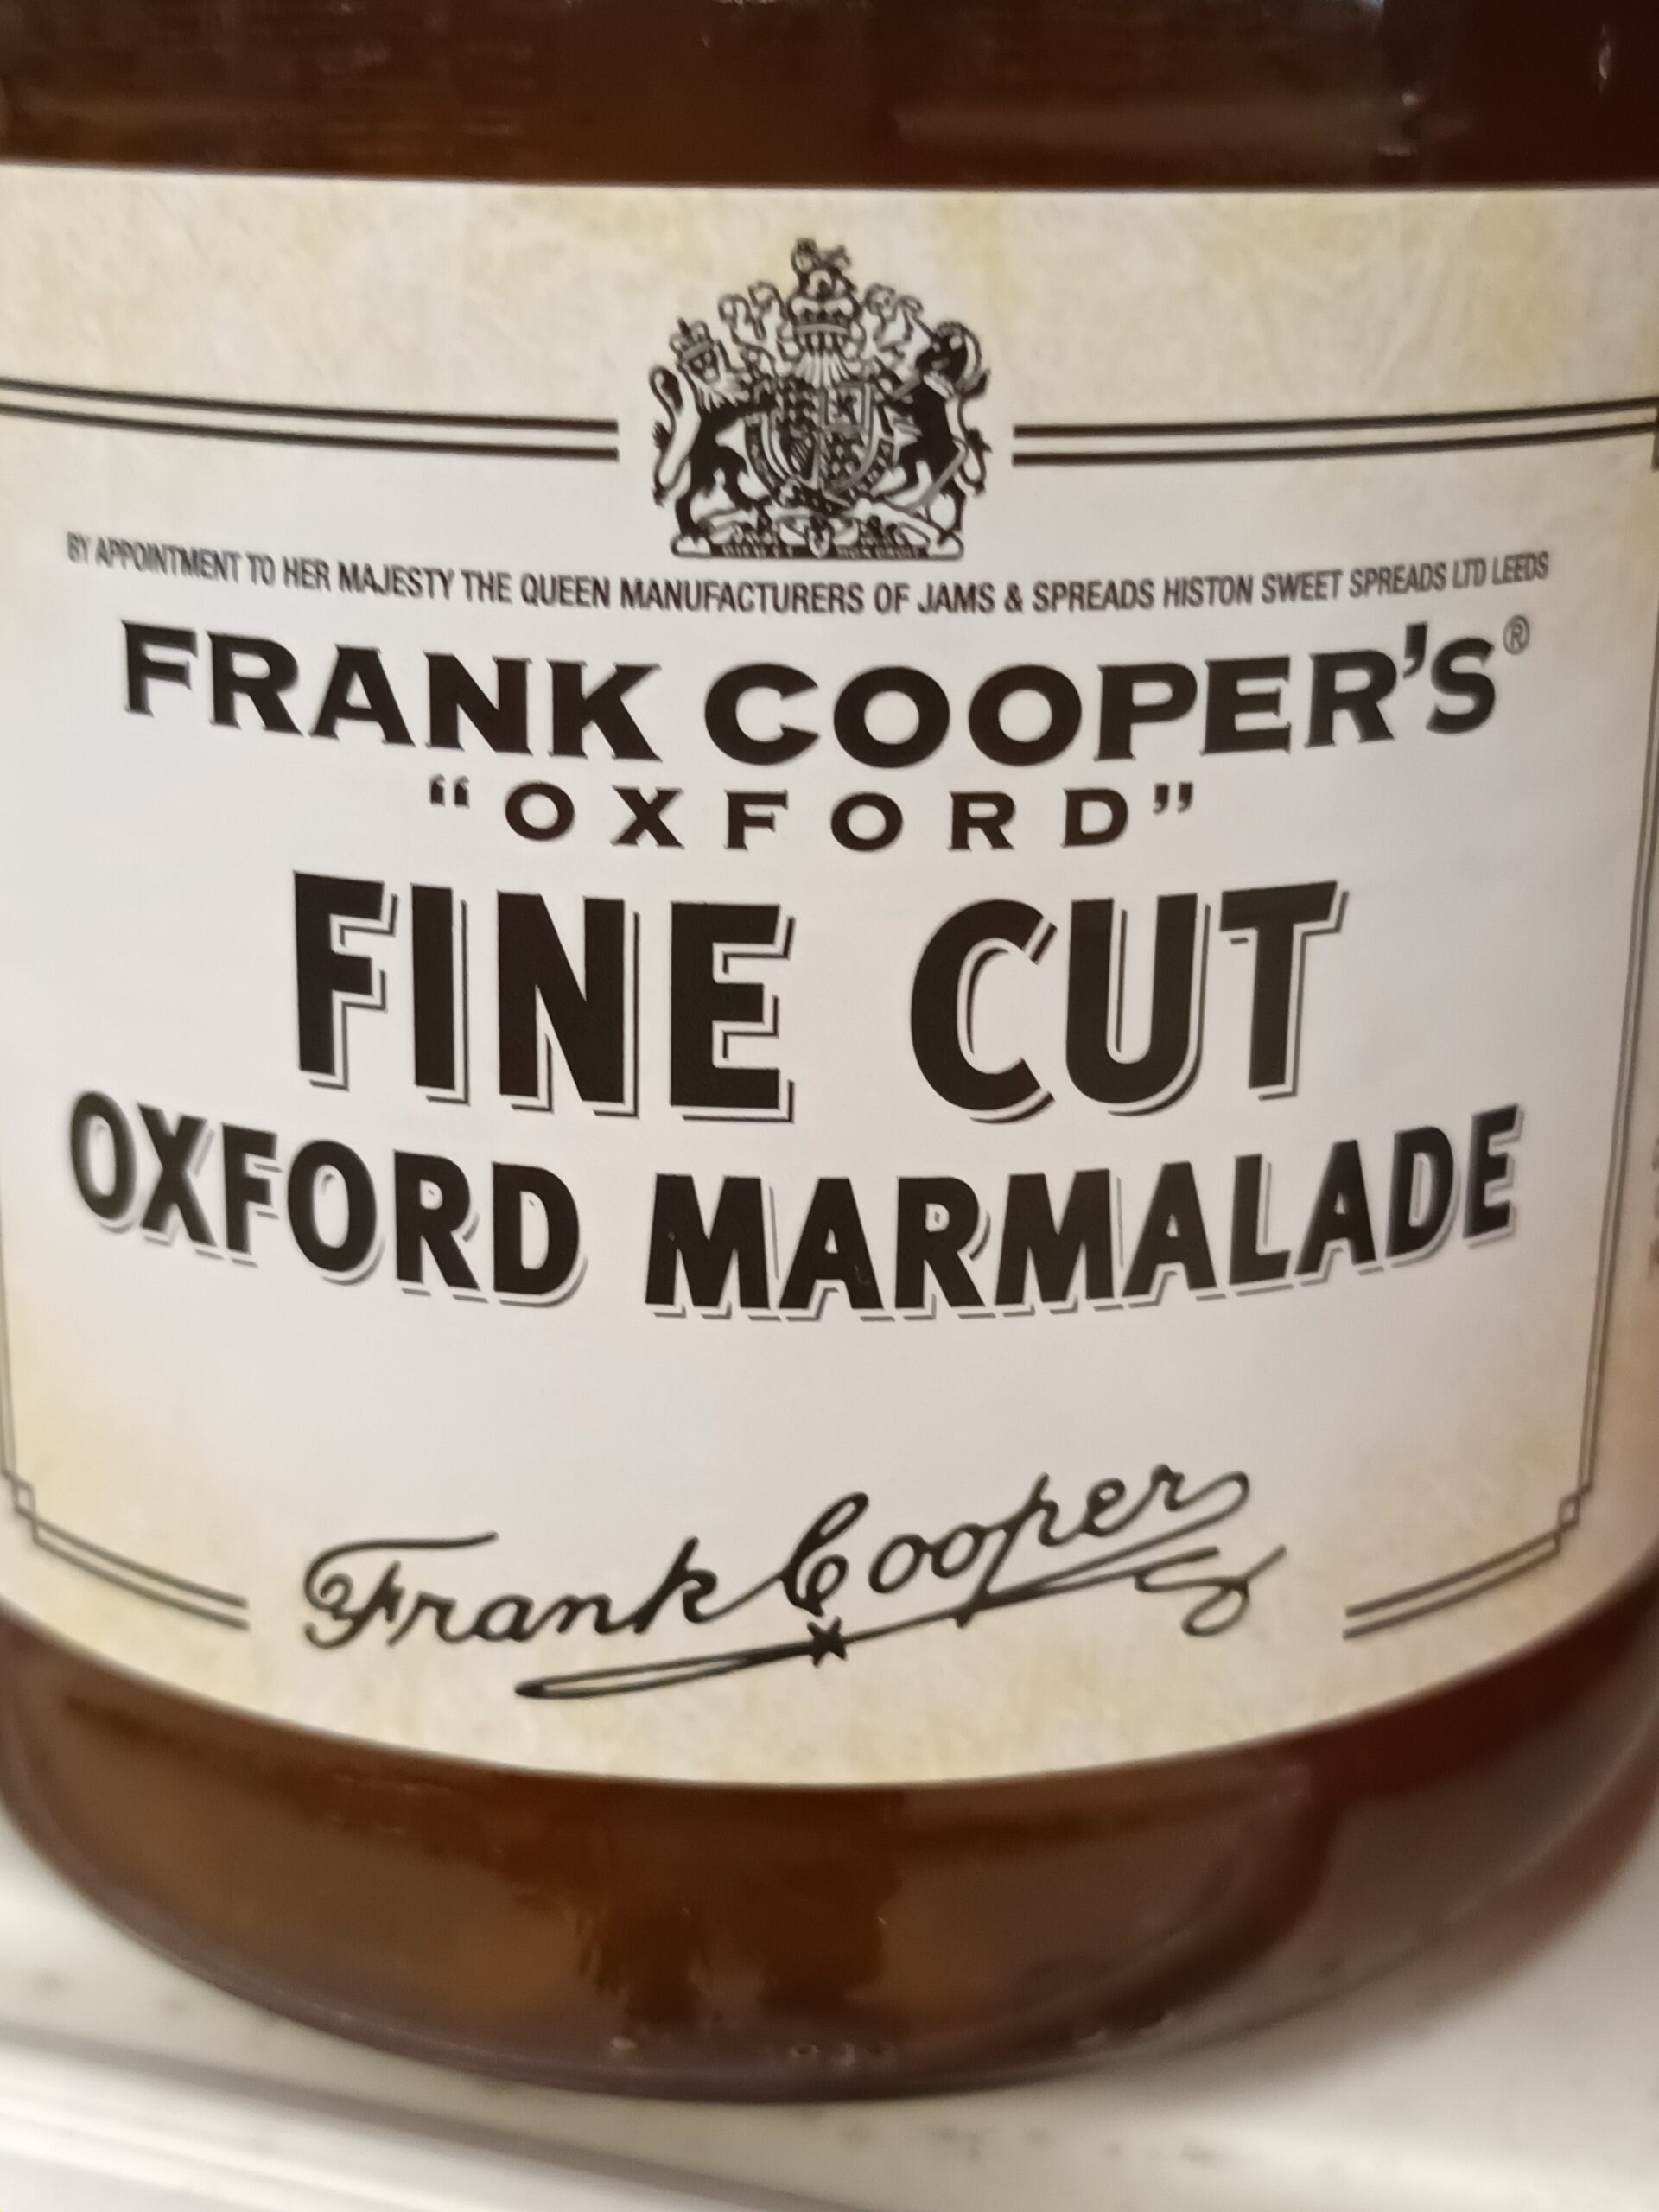 Pic of Frank Cooper's Marmalade Alan dedman Royle Seal of Approval